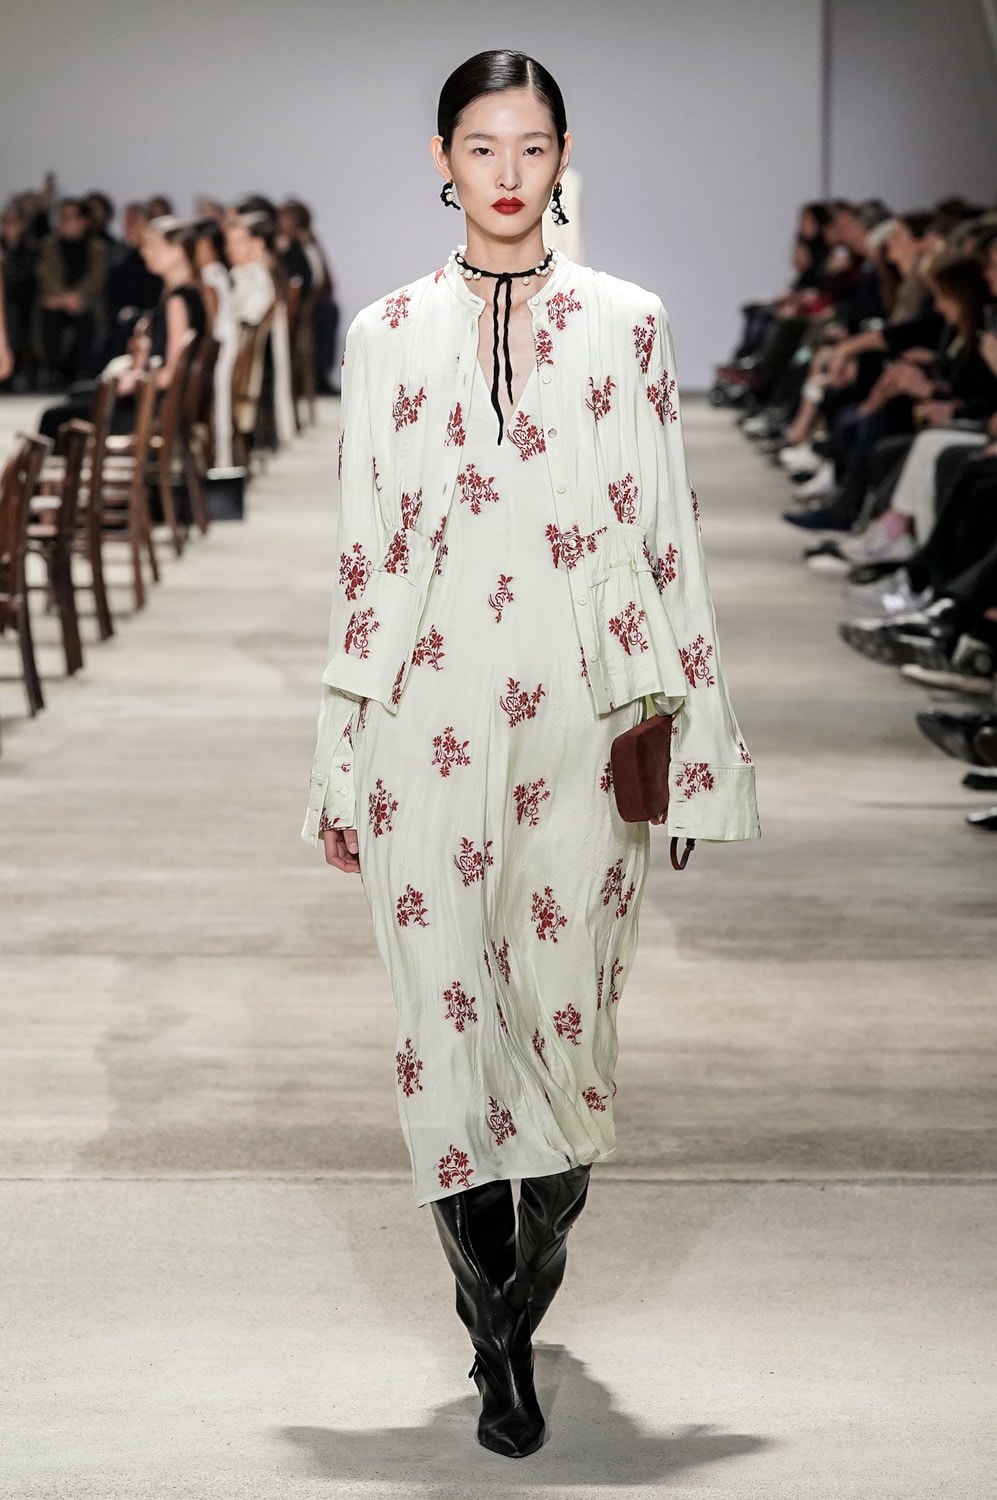 Jil Sander Fall/Winter 2020 Collection Runway Show Floral Dress White Red